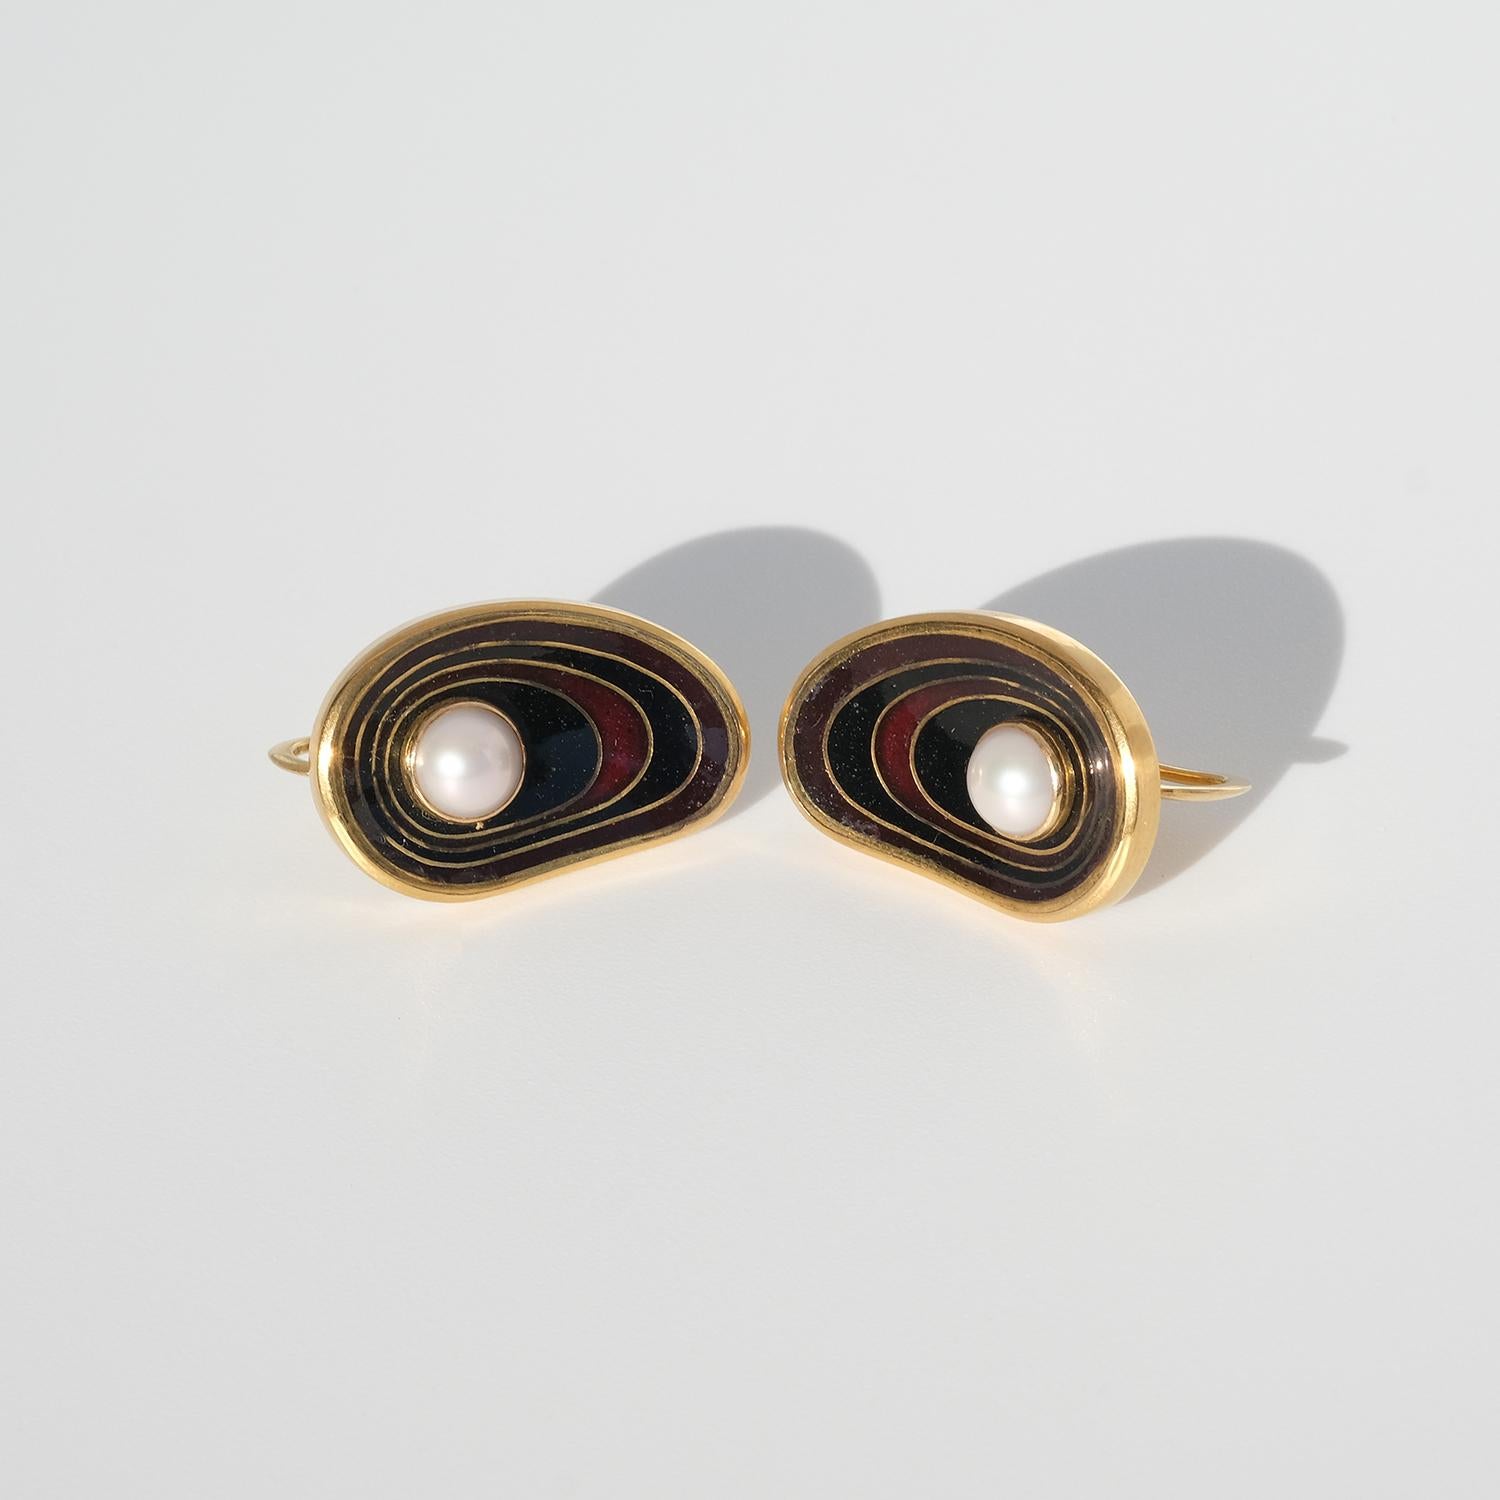 Pair of Swedish Earrings Made by Sigurd Persson, Made 1951 For Sale 2